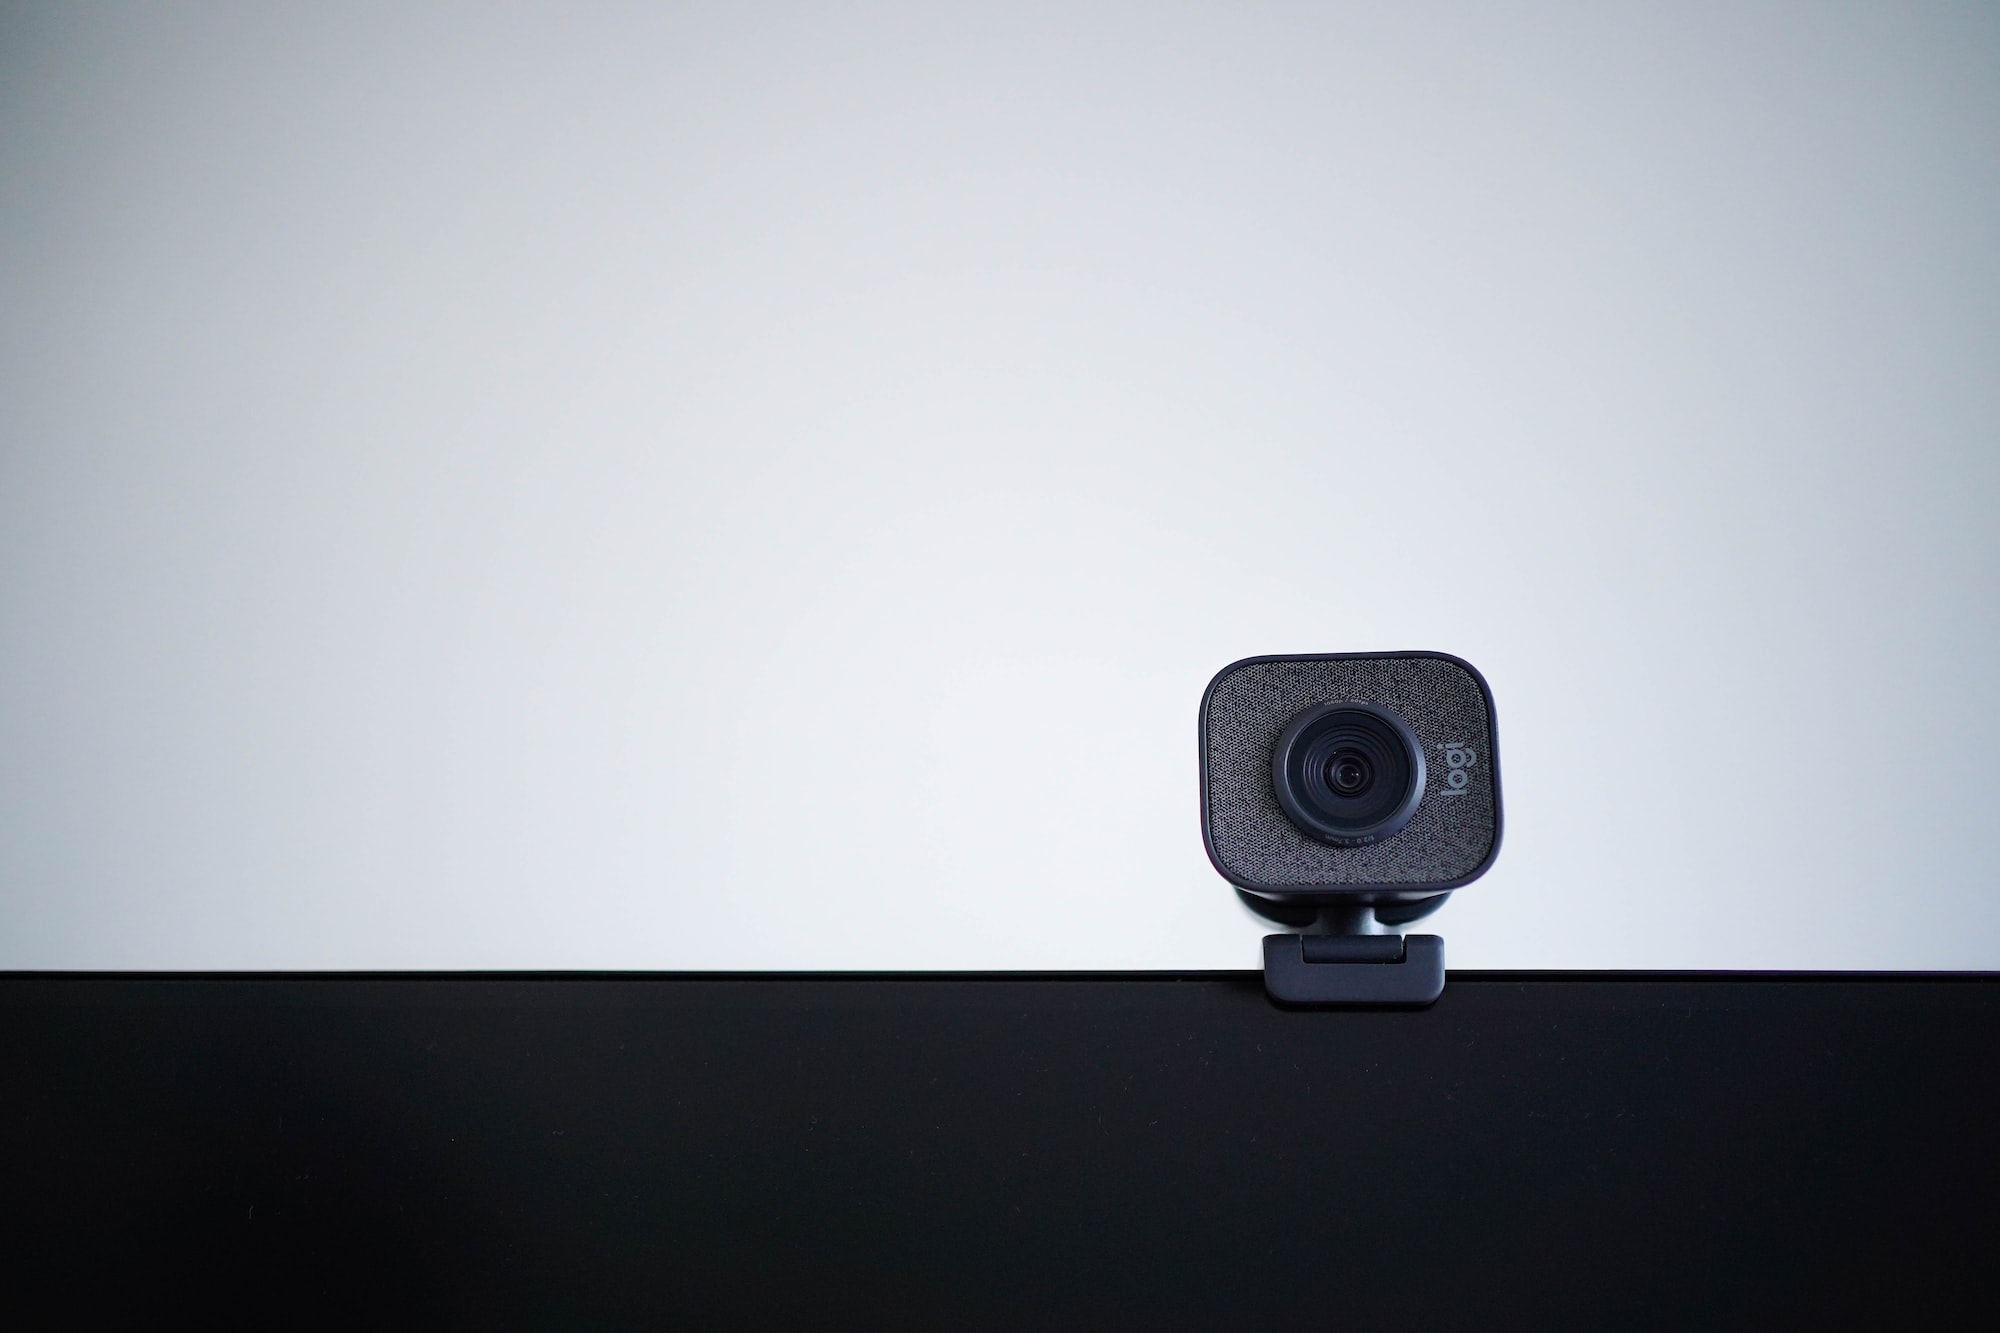 How To Turn Your Webcam Into A Motion Detector